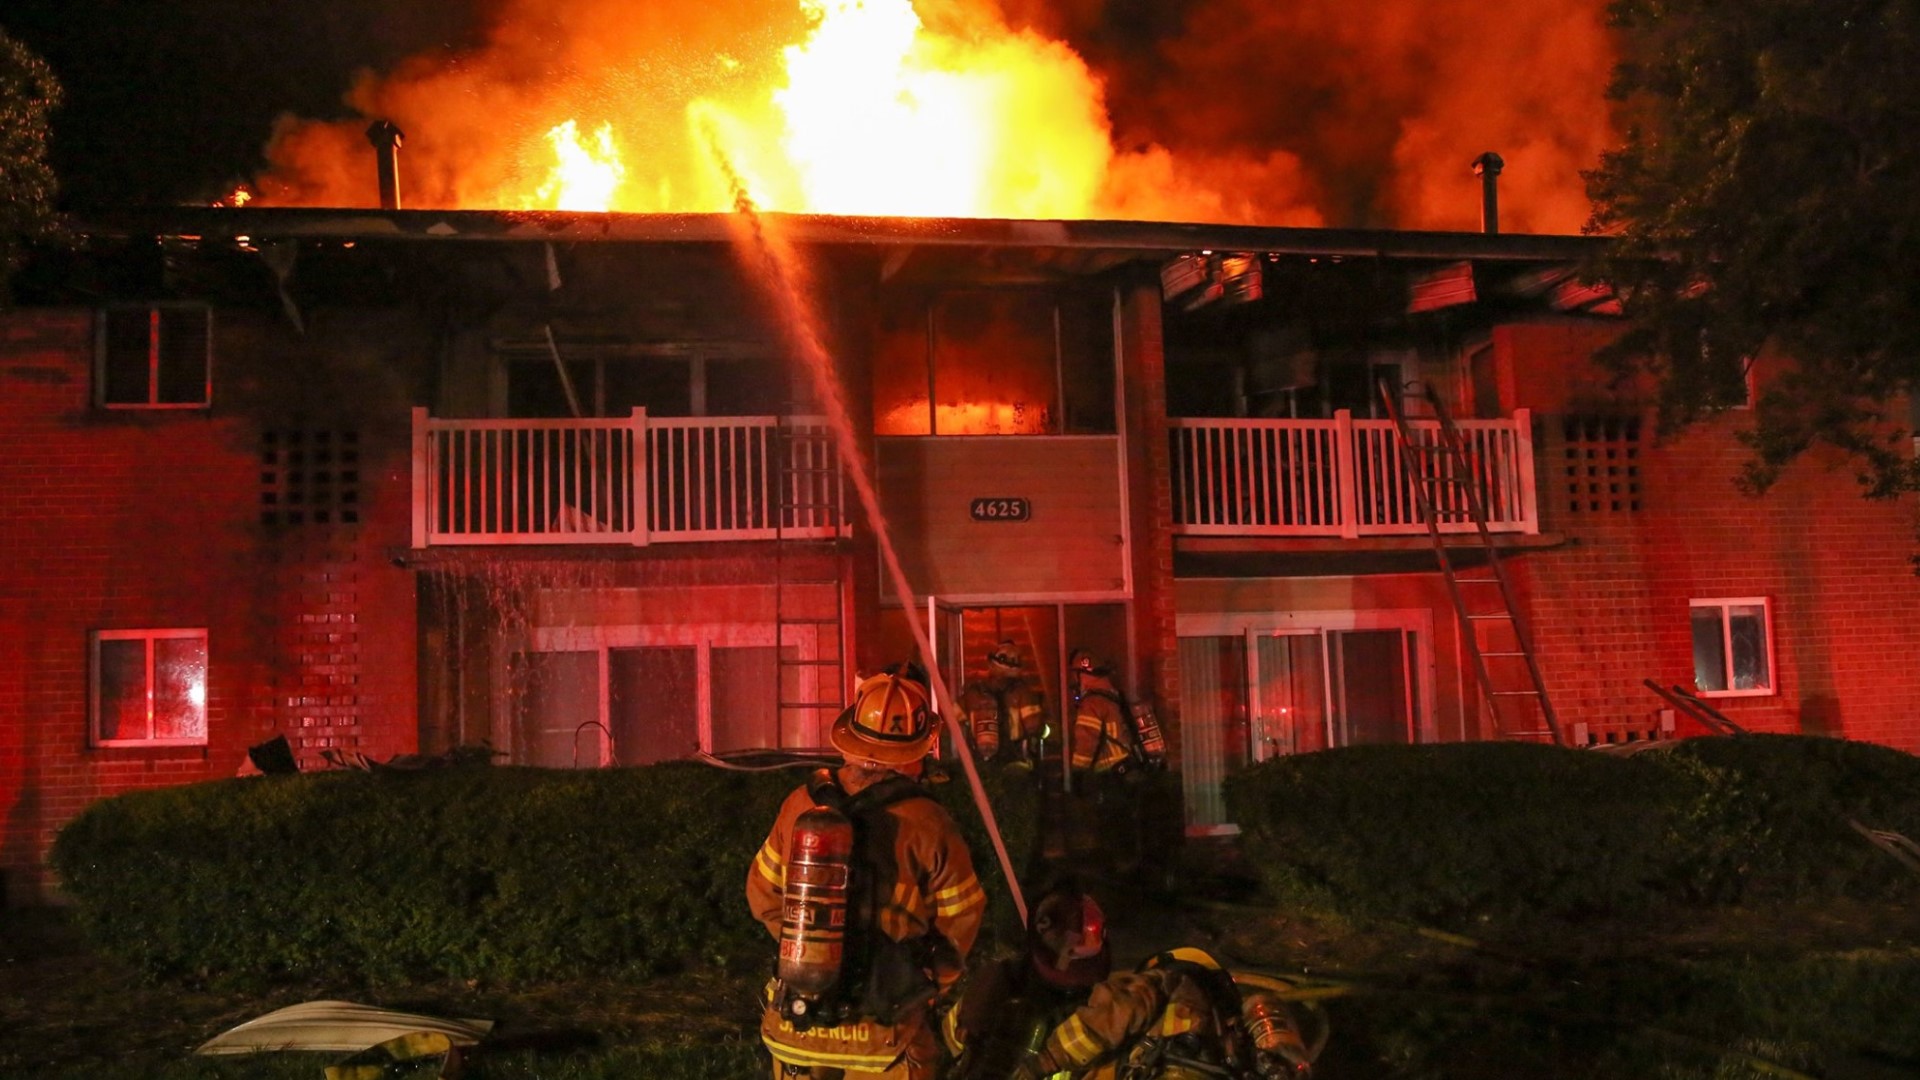 Virginia Beach Fire Department investigators charged a man with arson in connection with last week's 2-alarm fire at Pembroke Town Center Apartments.